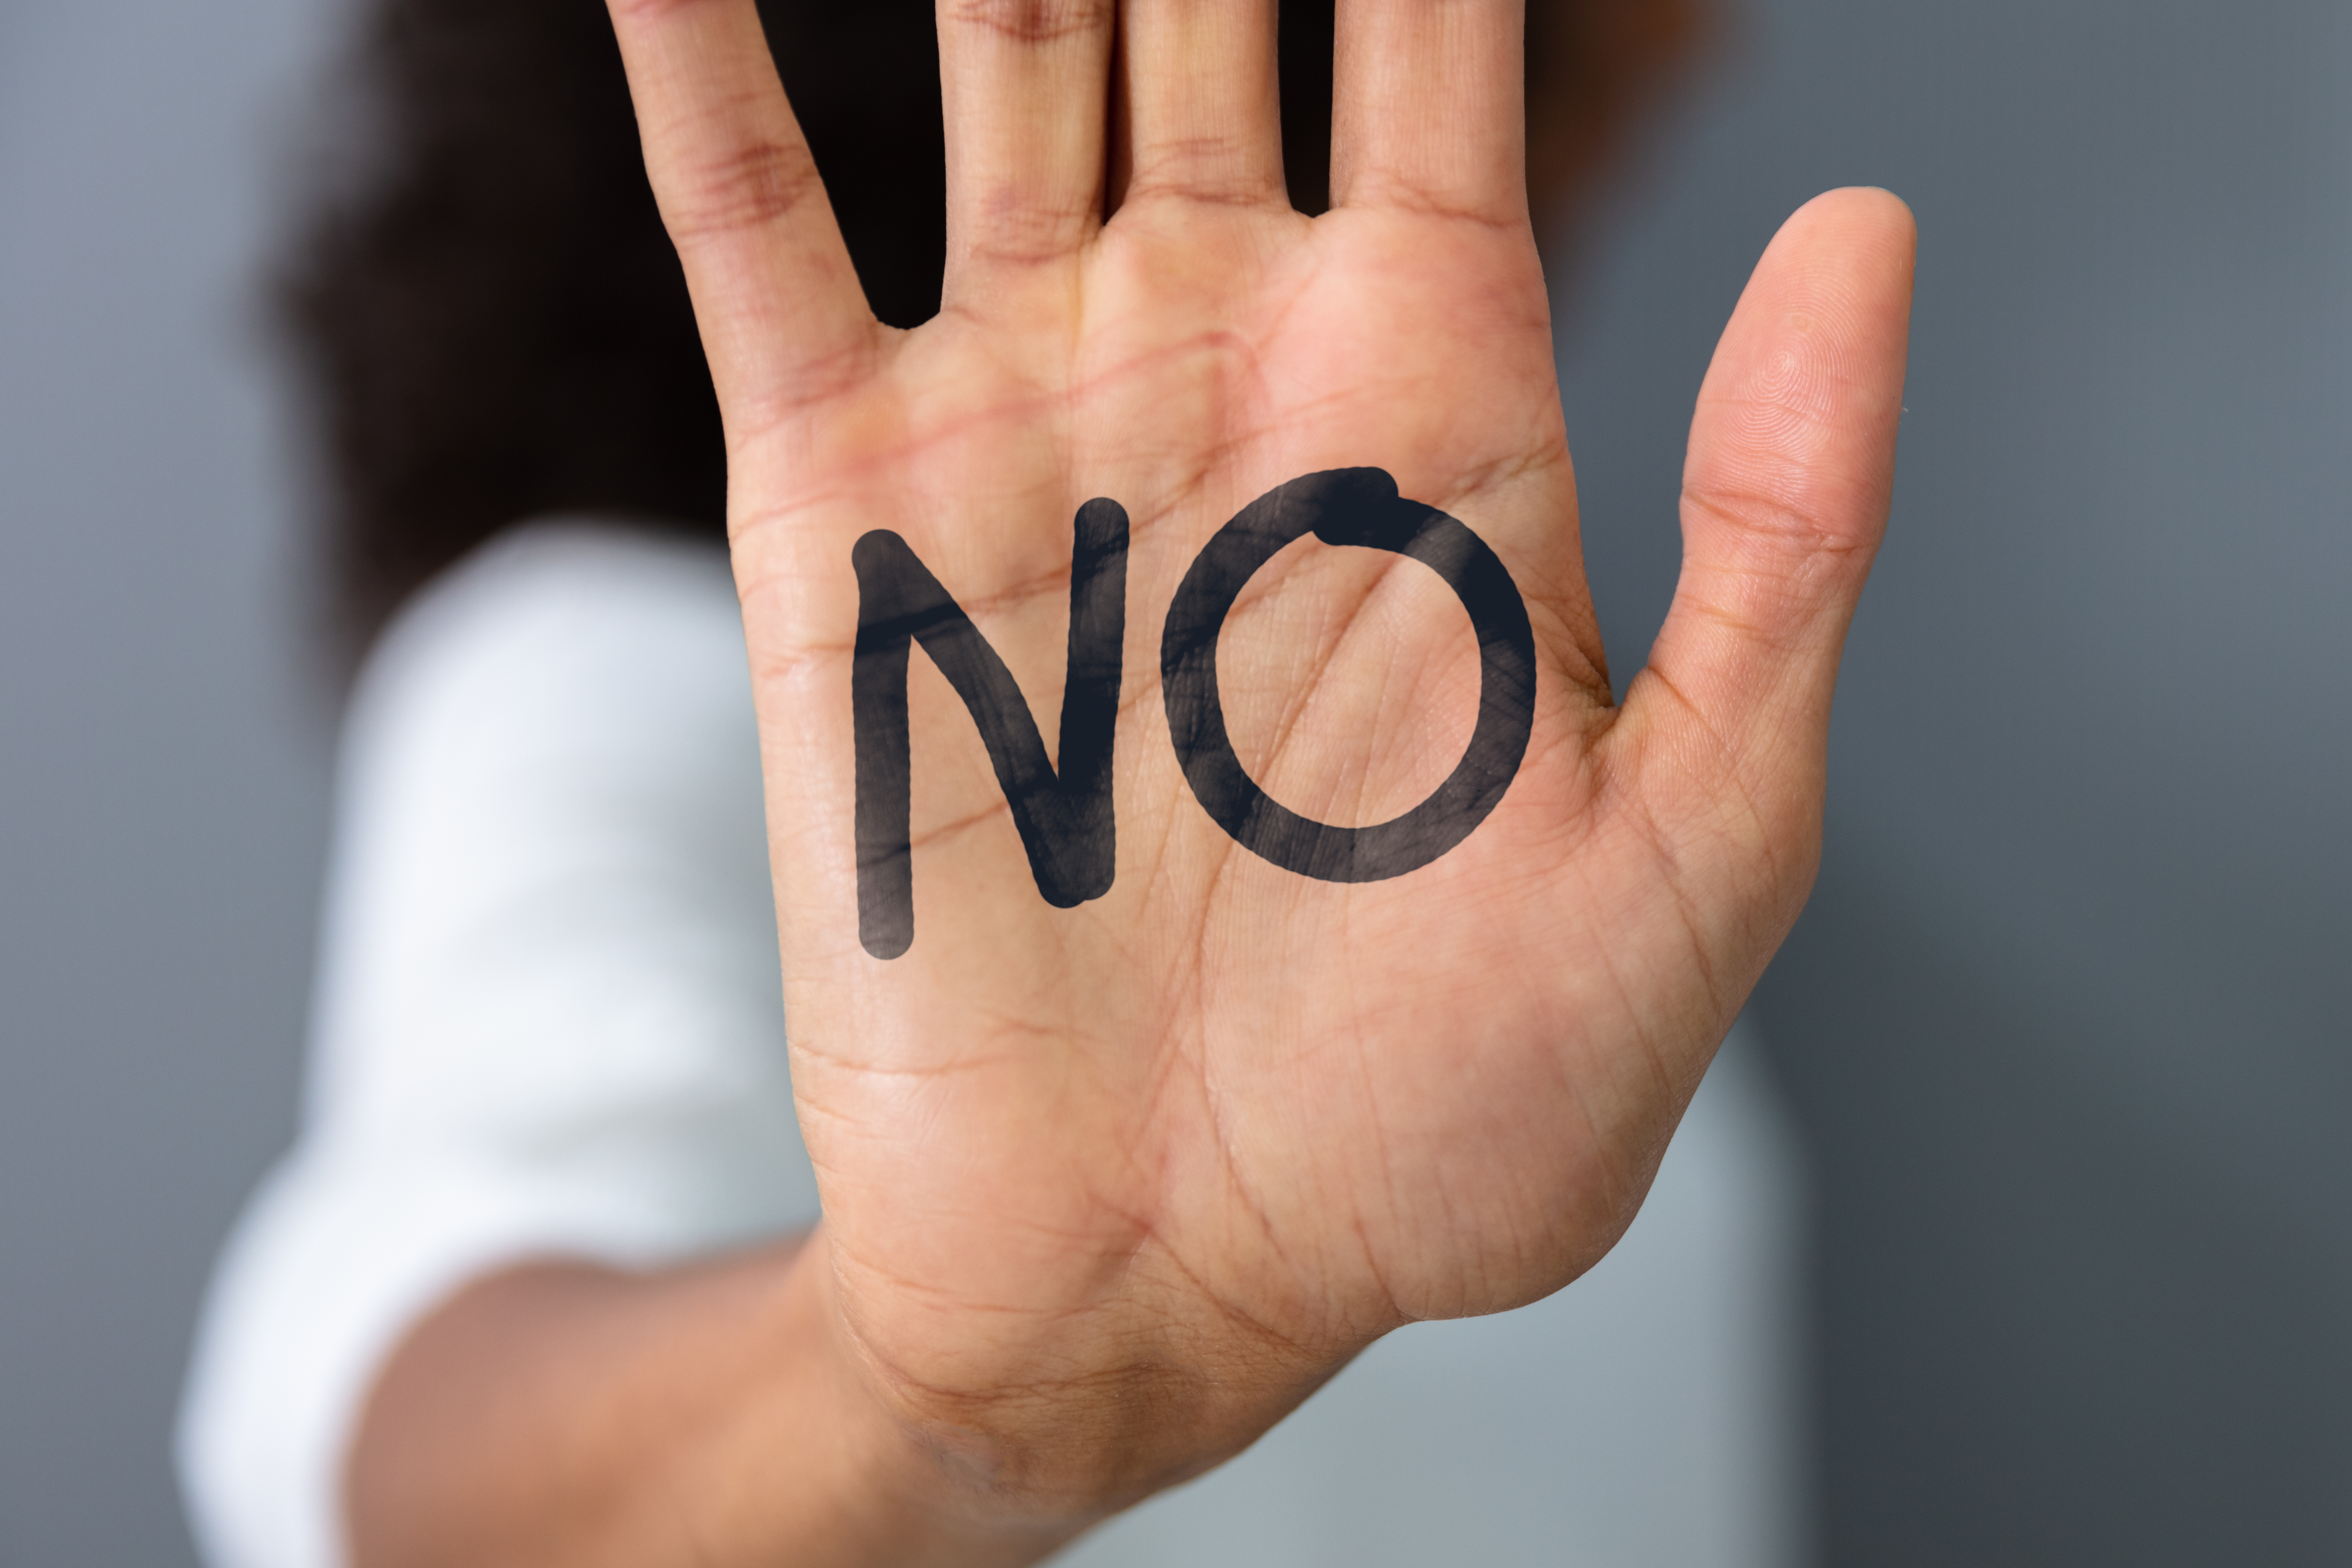 A woman's raised hand with 'No' text | Source: Shutterstock